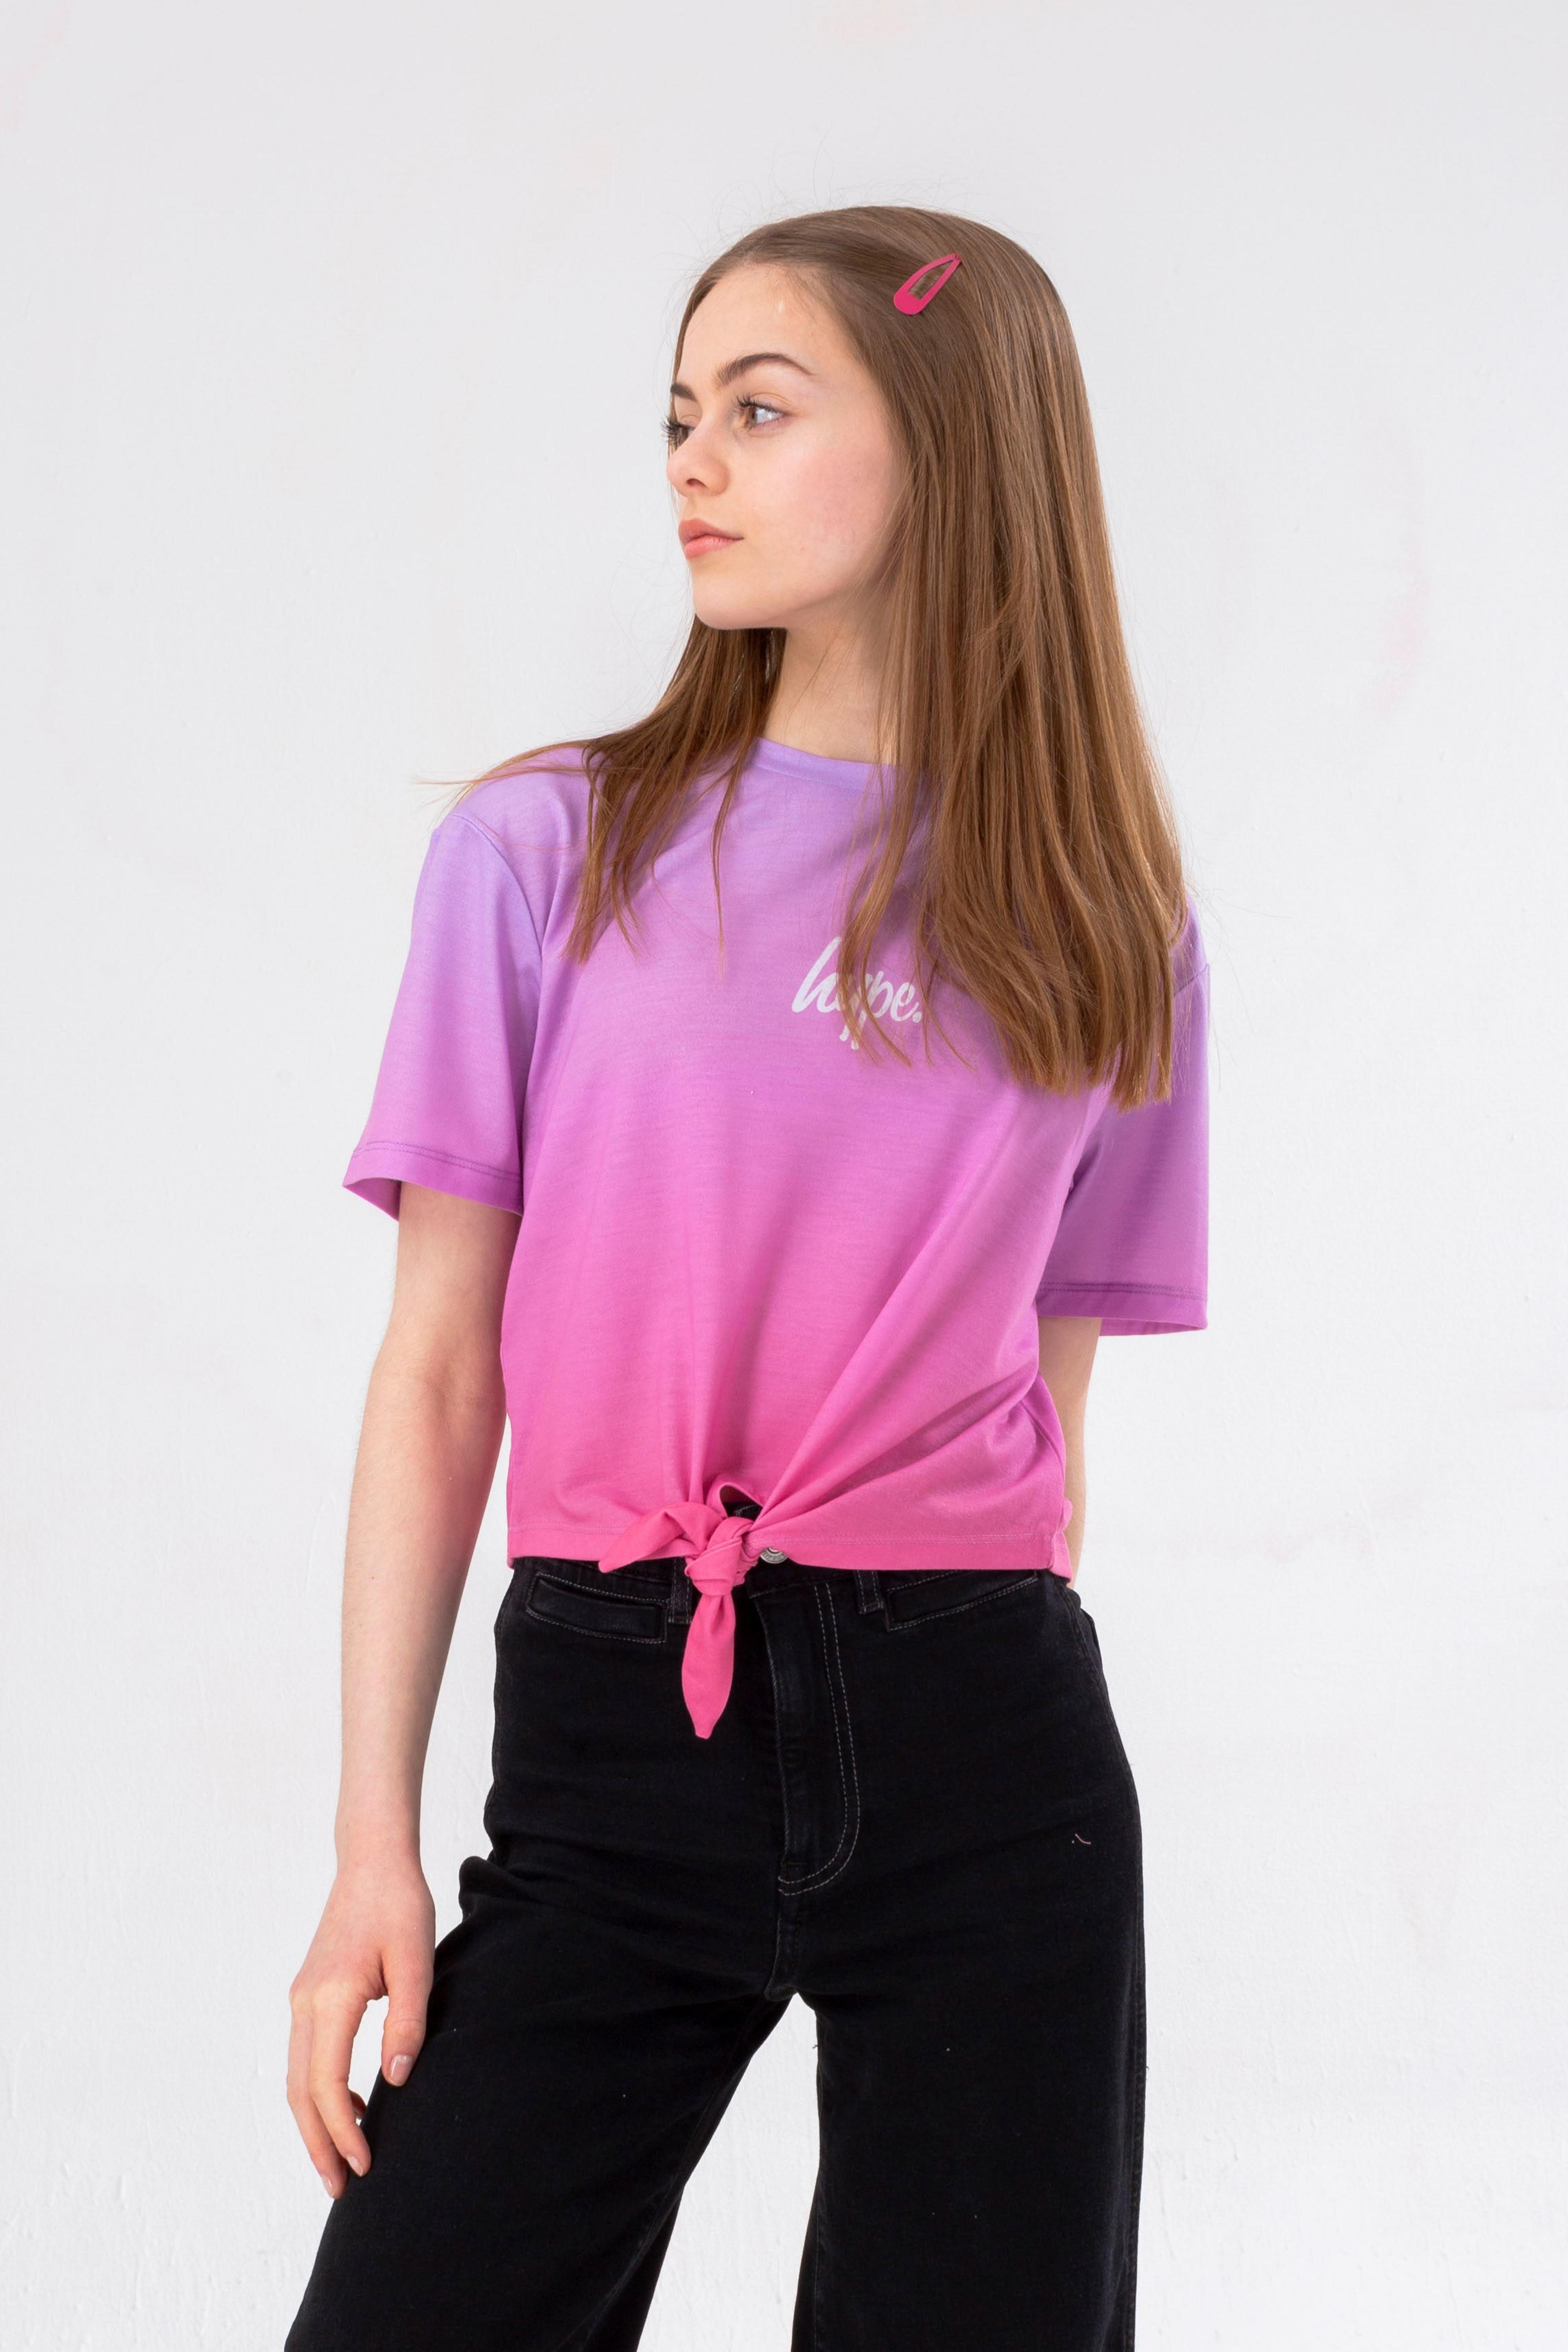 HYPE PINK PURPLE SCRIBBLE GIRLS CROPPED TIE T-SHIRT